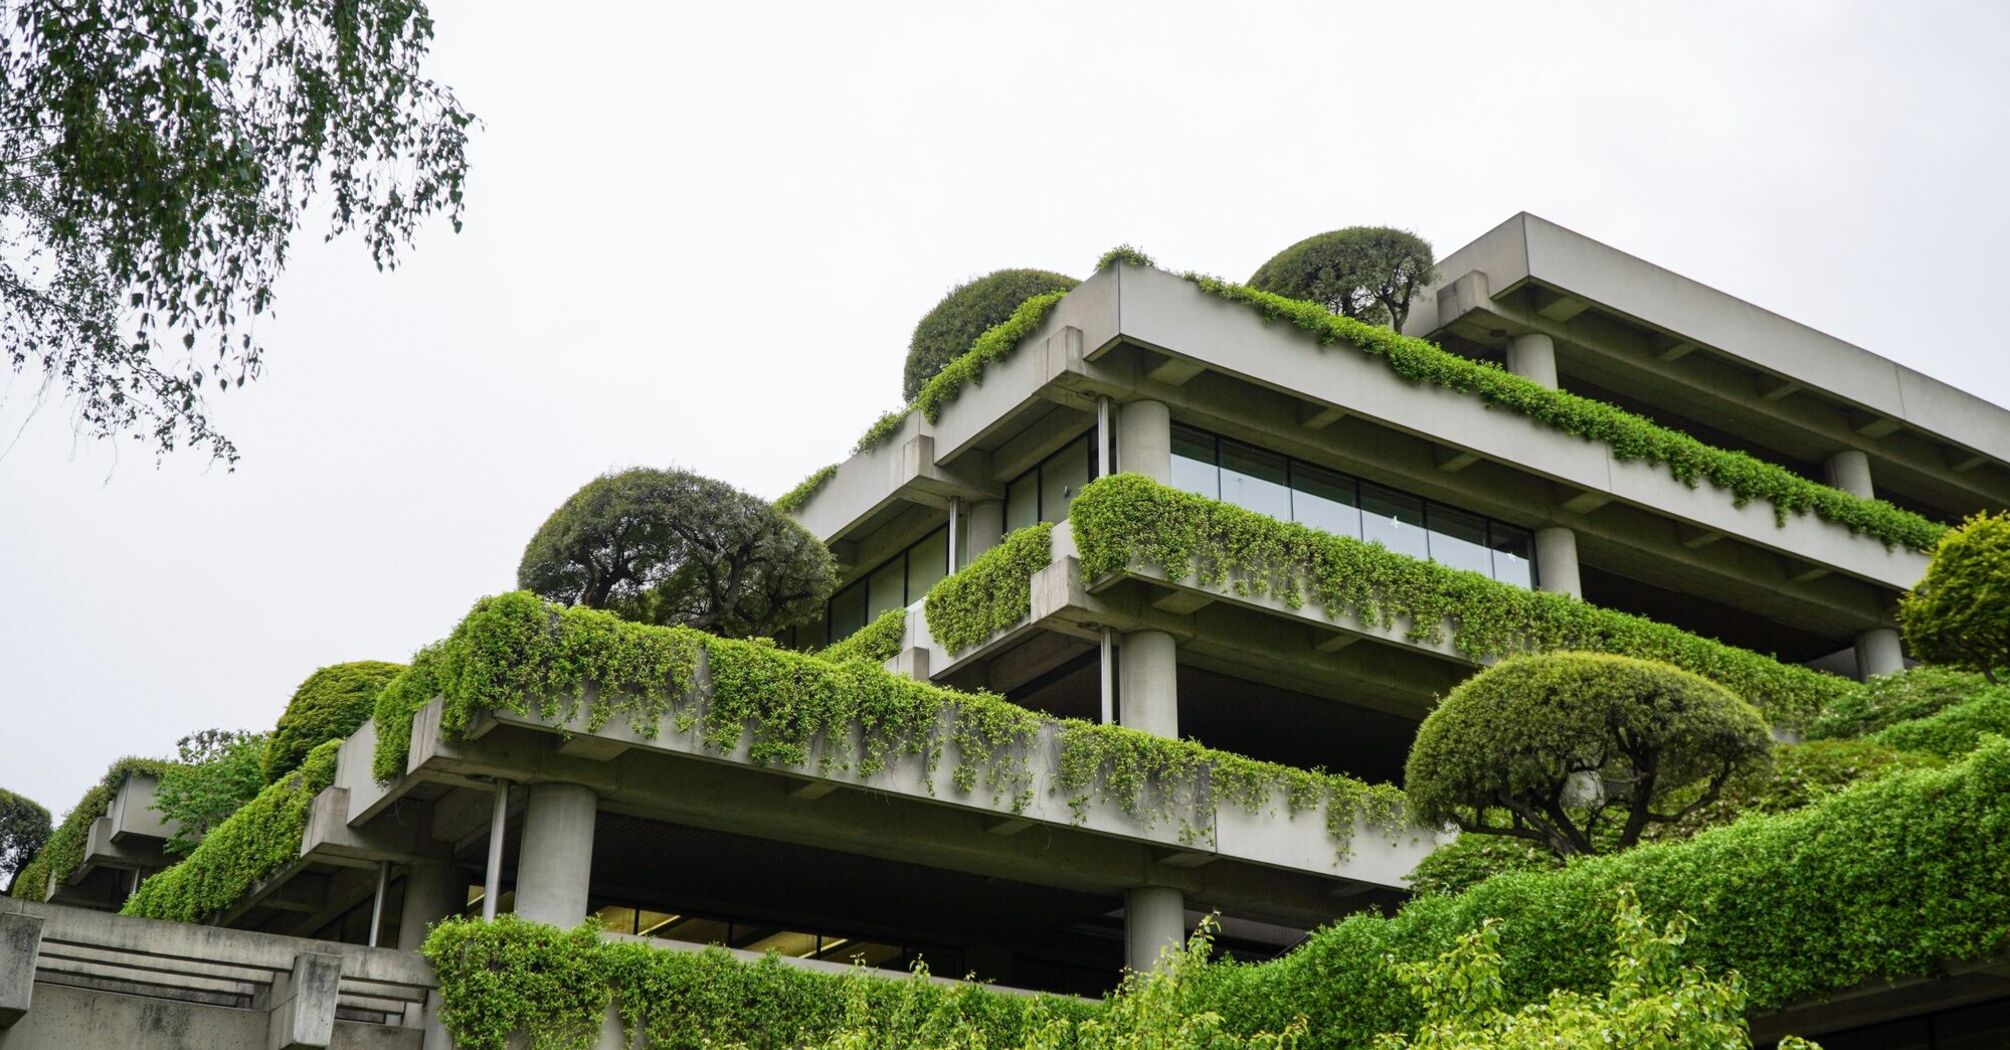 An eco-friendly hotel building covered with lush green plants and foliage, demonstrating modern sustainable architecture